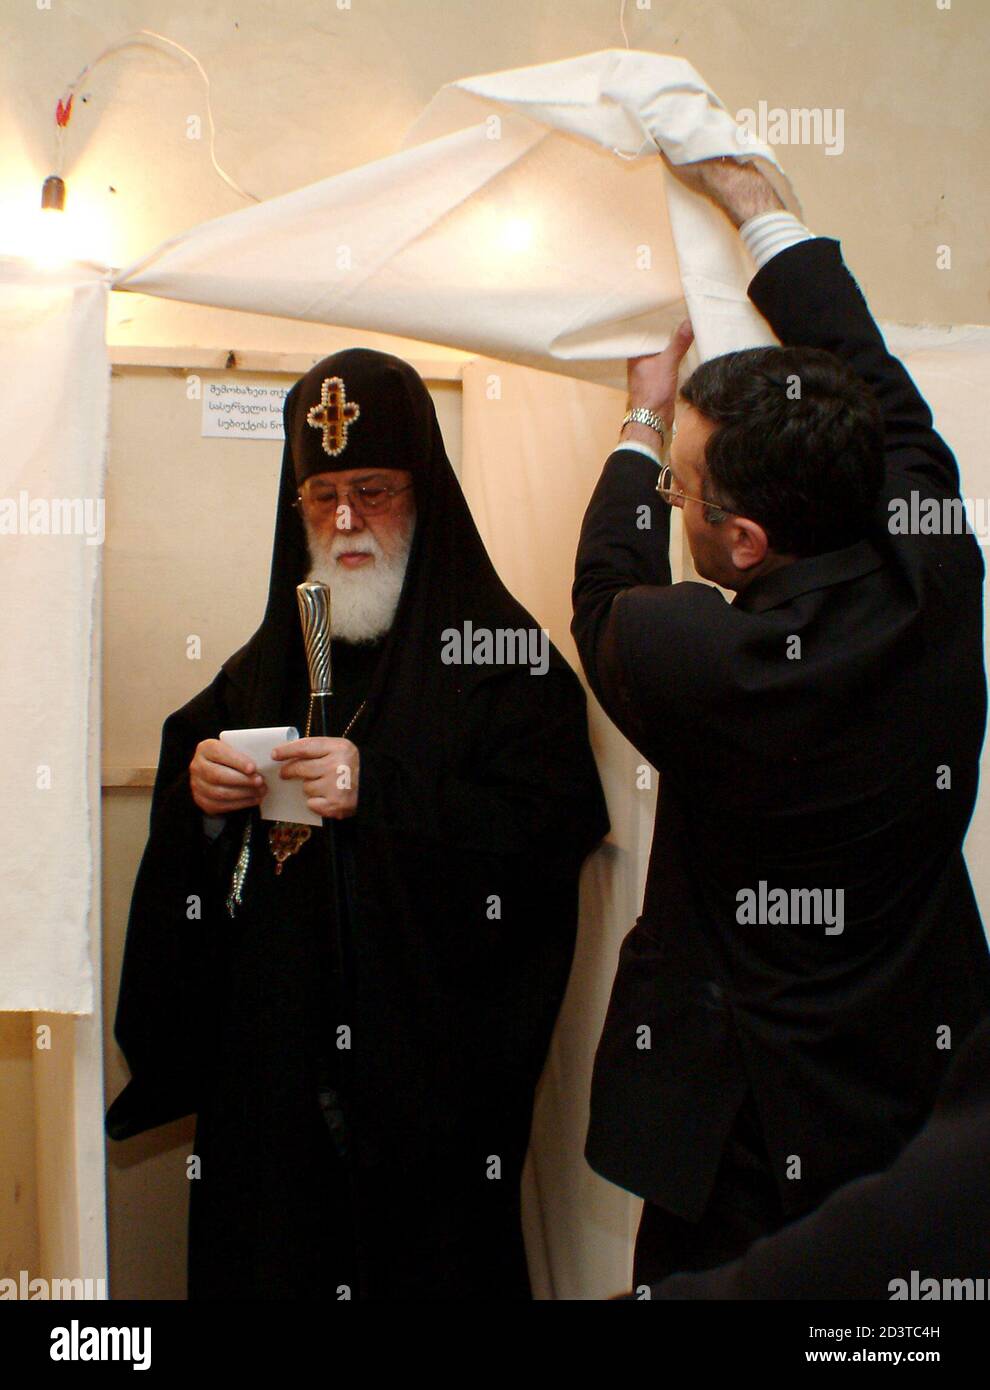 An election official helps Patriarch Ilia II of Georgia to leave a polling booth in Tbilisi March 28, 2004. Georgians voting in a parliamentary election on Sunday were poised to hand President Mikhail Saakashvili's allies a big victory, but tensions in a wayward province threatend to cast a shadow over the poll. Irakli Gedenidze/REUTERS REUTERS  GD/FMS Stock Photo